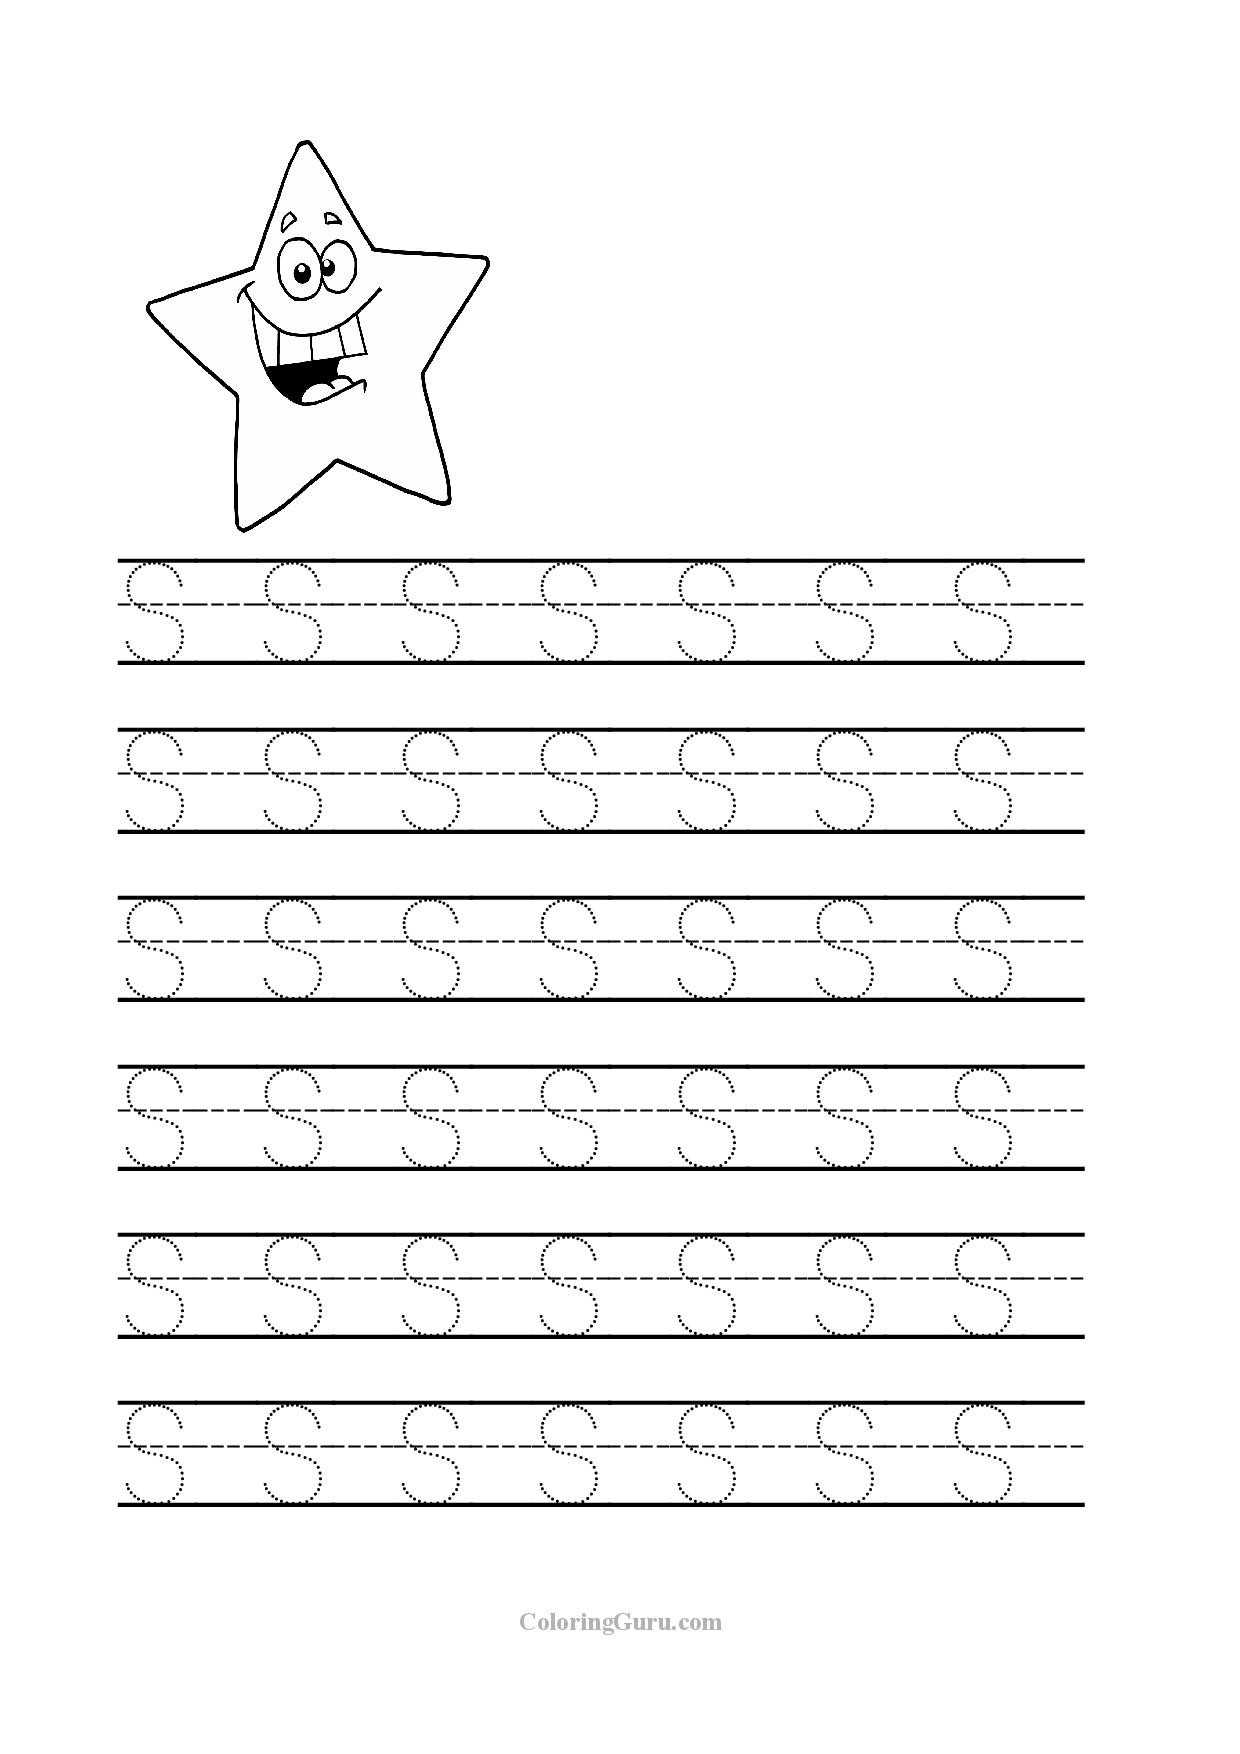 Fire Safety Worksheets or Free Printable Preschool Worksheets New Free Fire Safety Patterns